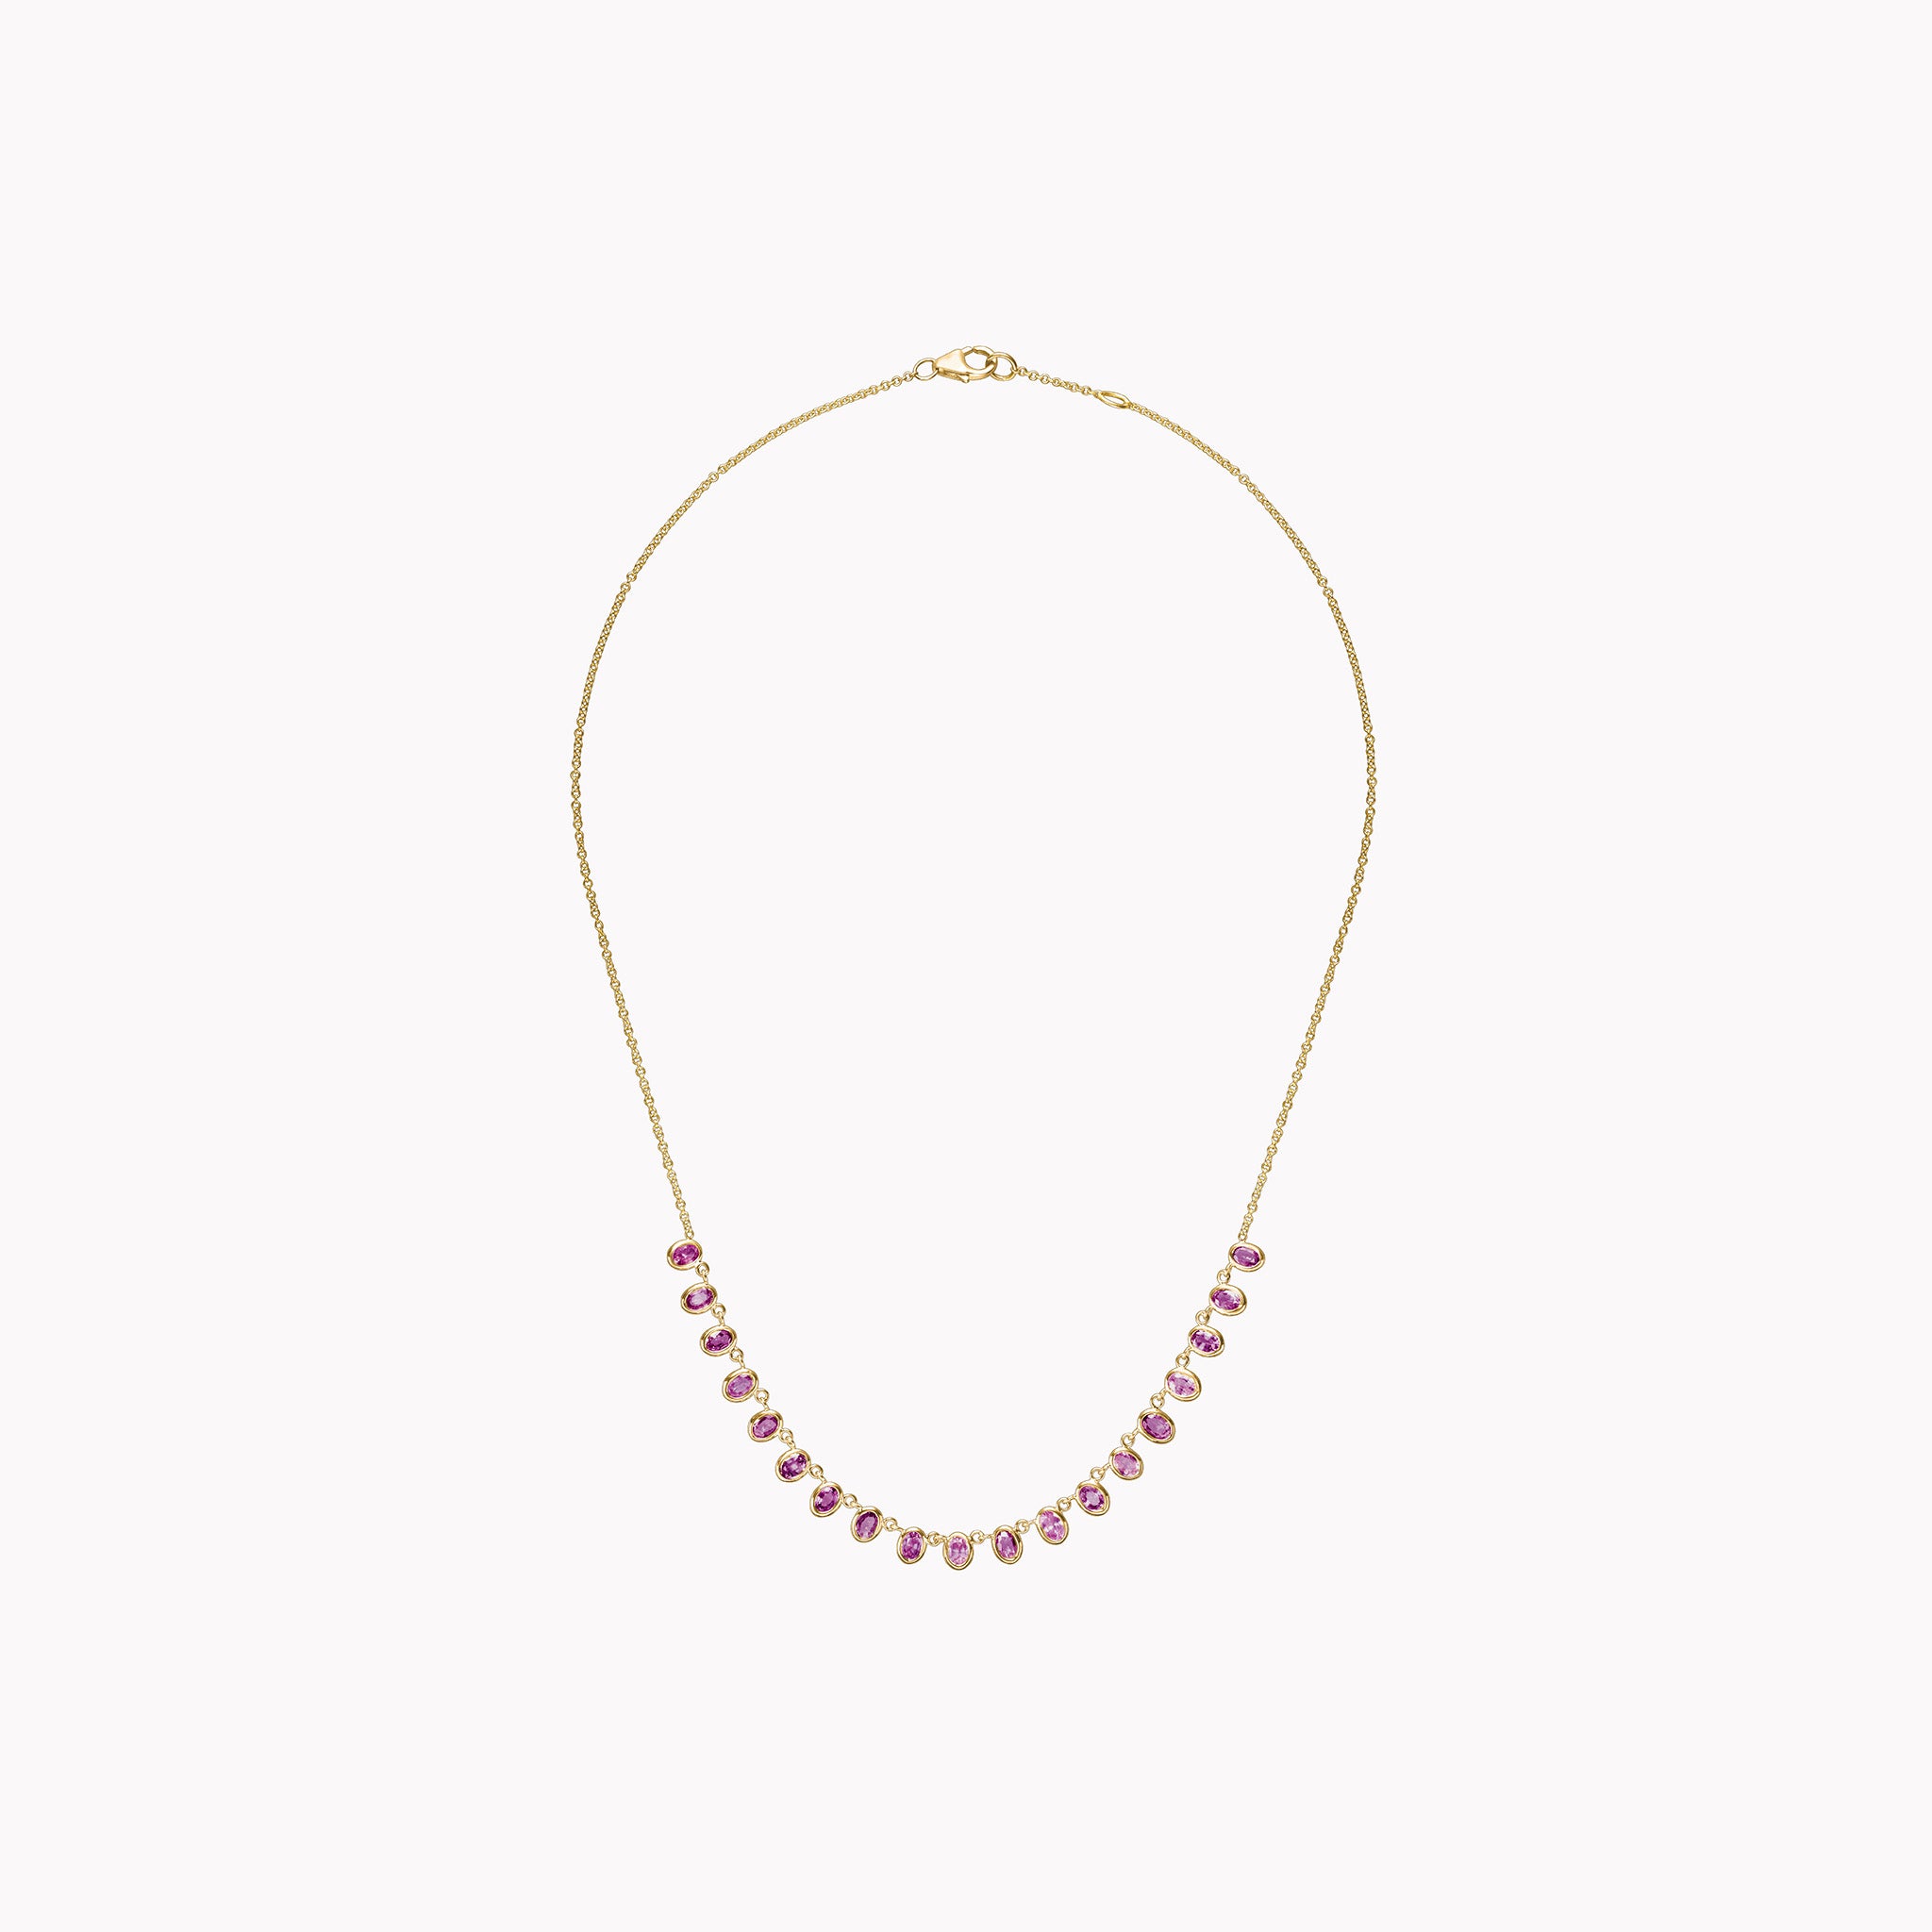 The Lena Petite Pink Sapphire Necklace